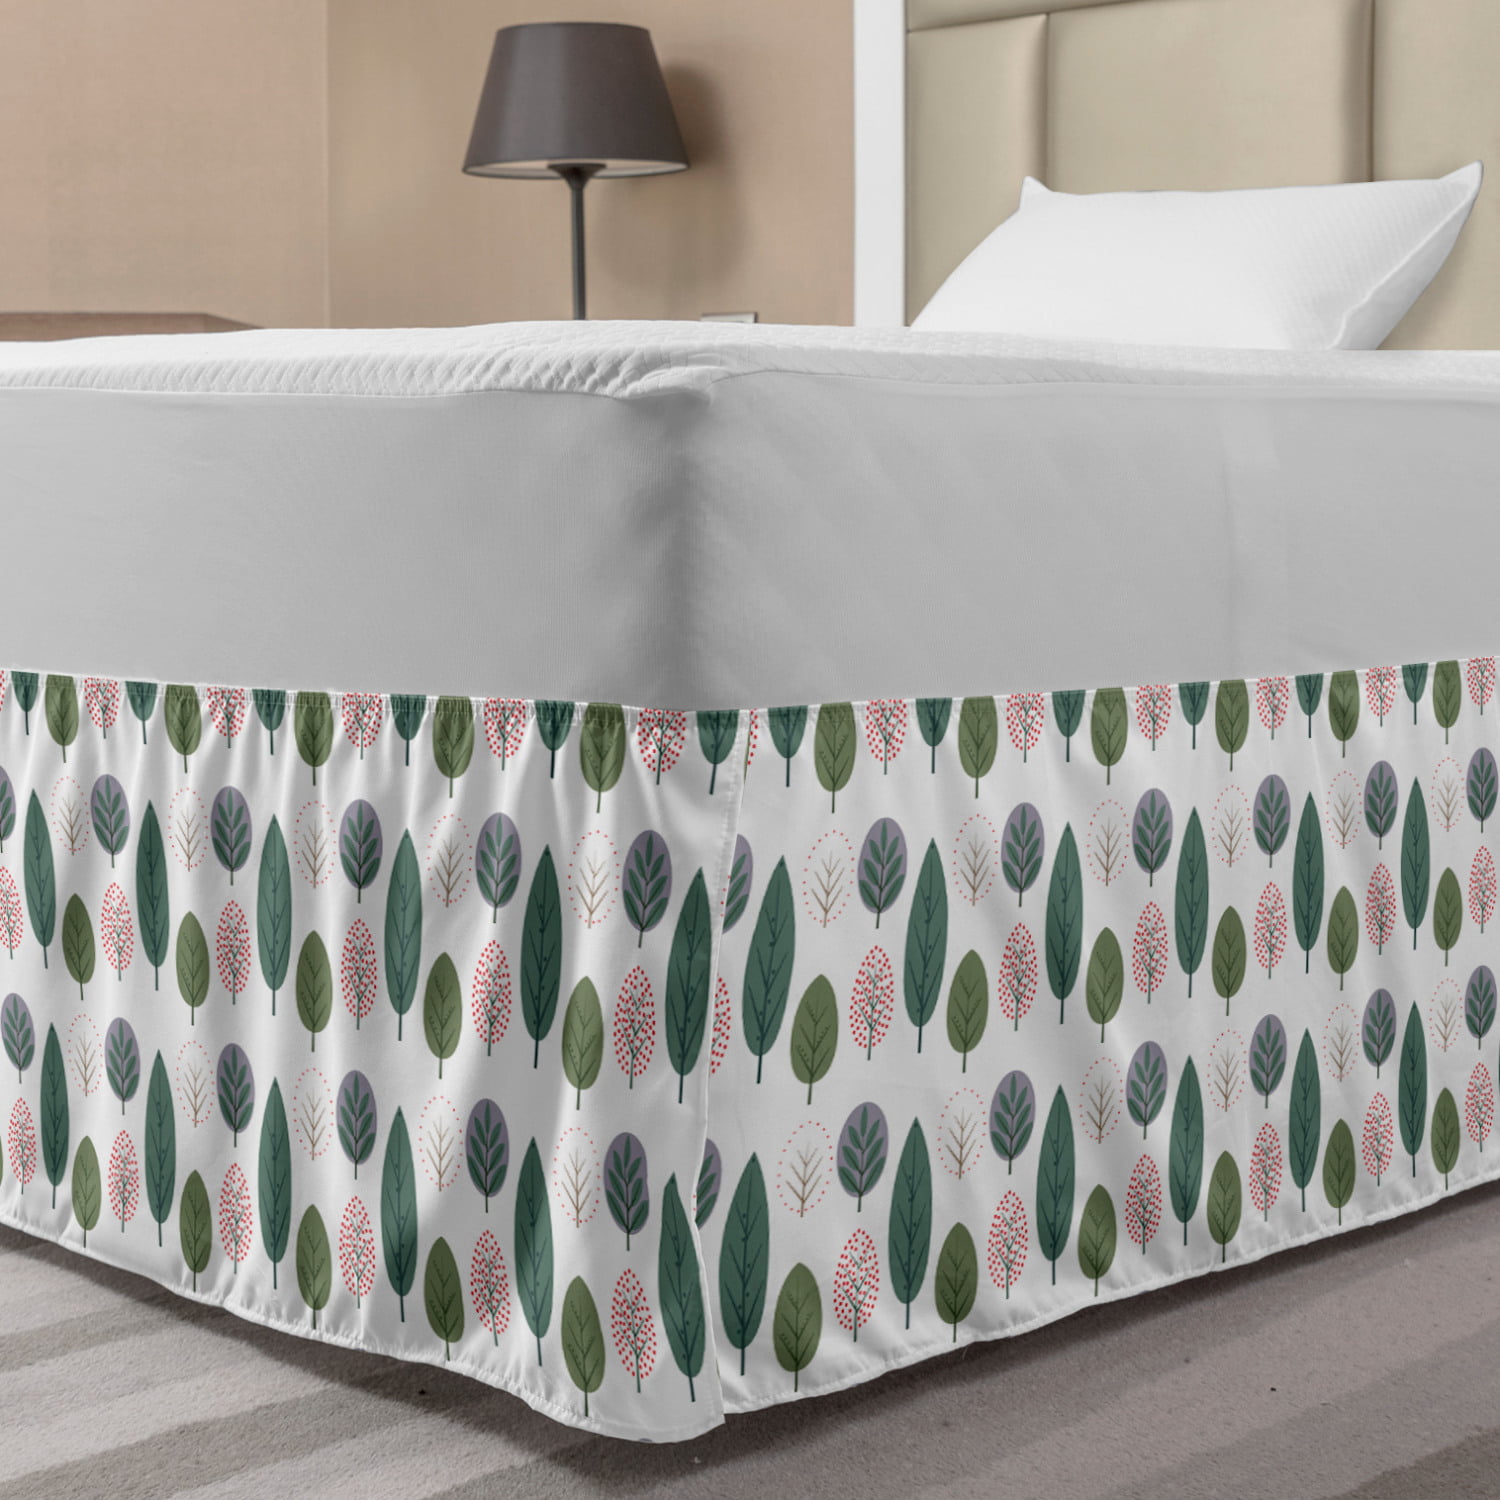 Gingko Bed Skirt, Mother Nature Ginkgo Biloba Tree Leaves Homeopathic  Therapy Foliage Pattern, Elastic Bedskirt Dust Ruffle Wrap Around for  Bedding ...